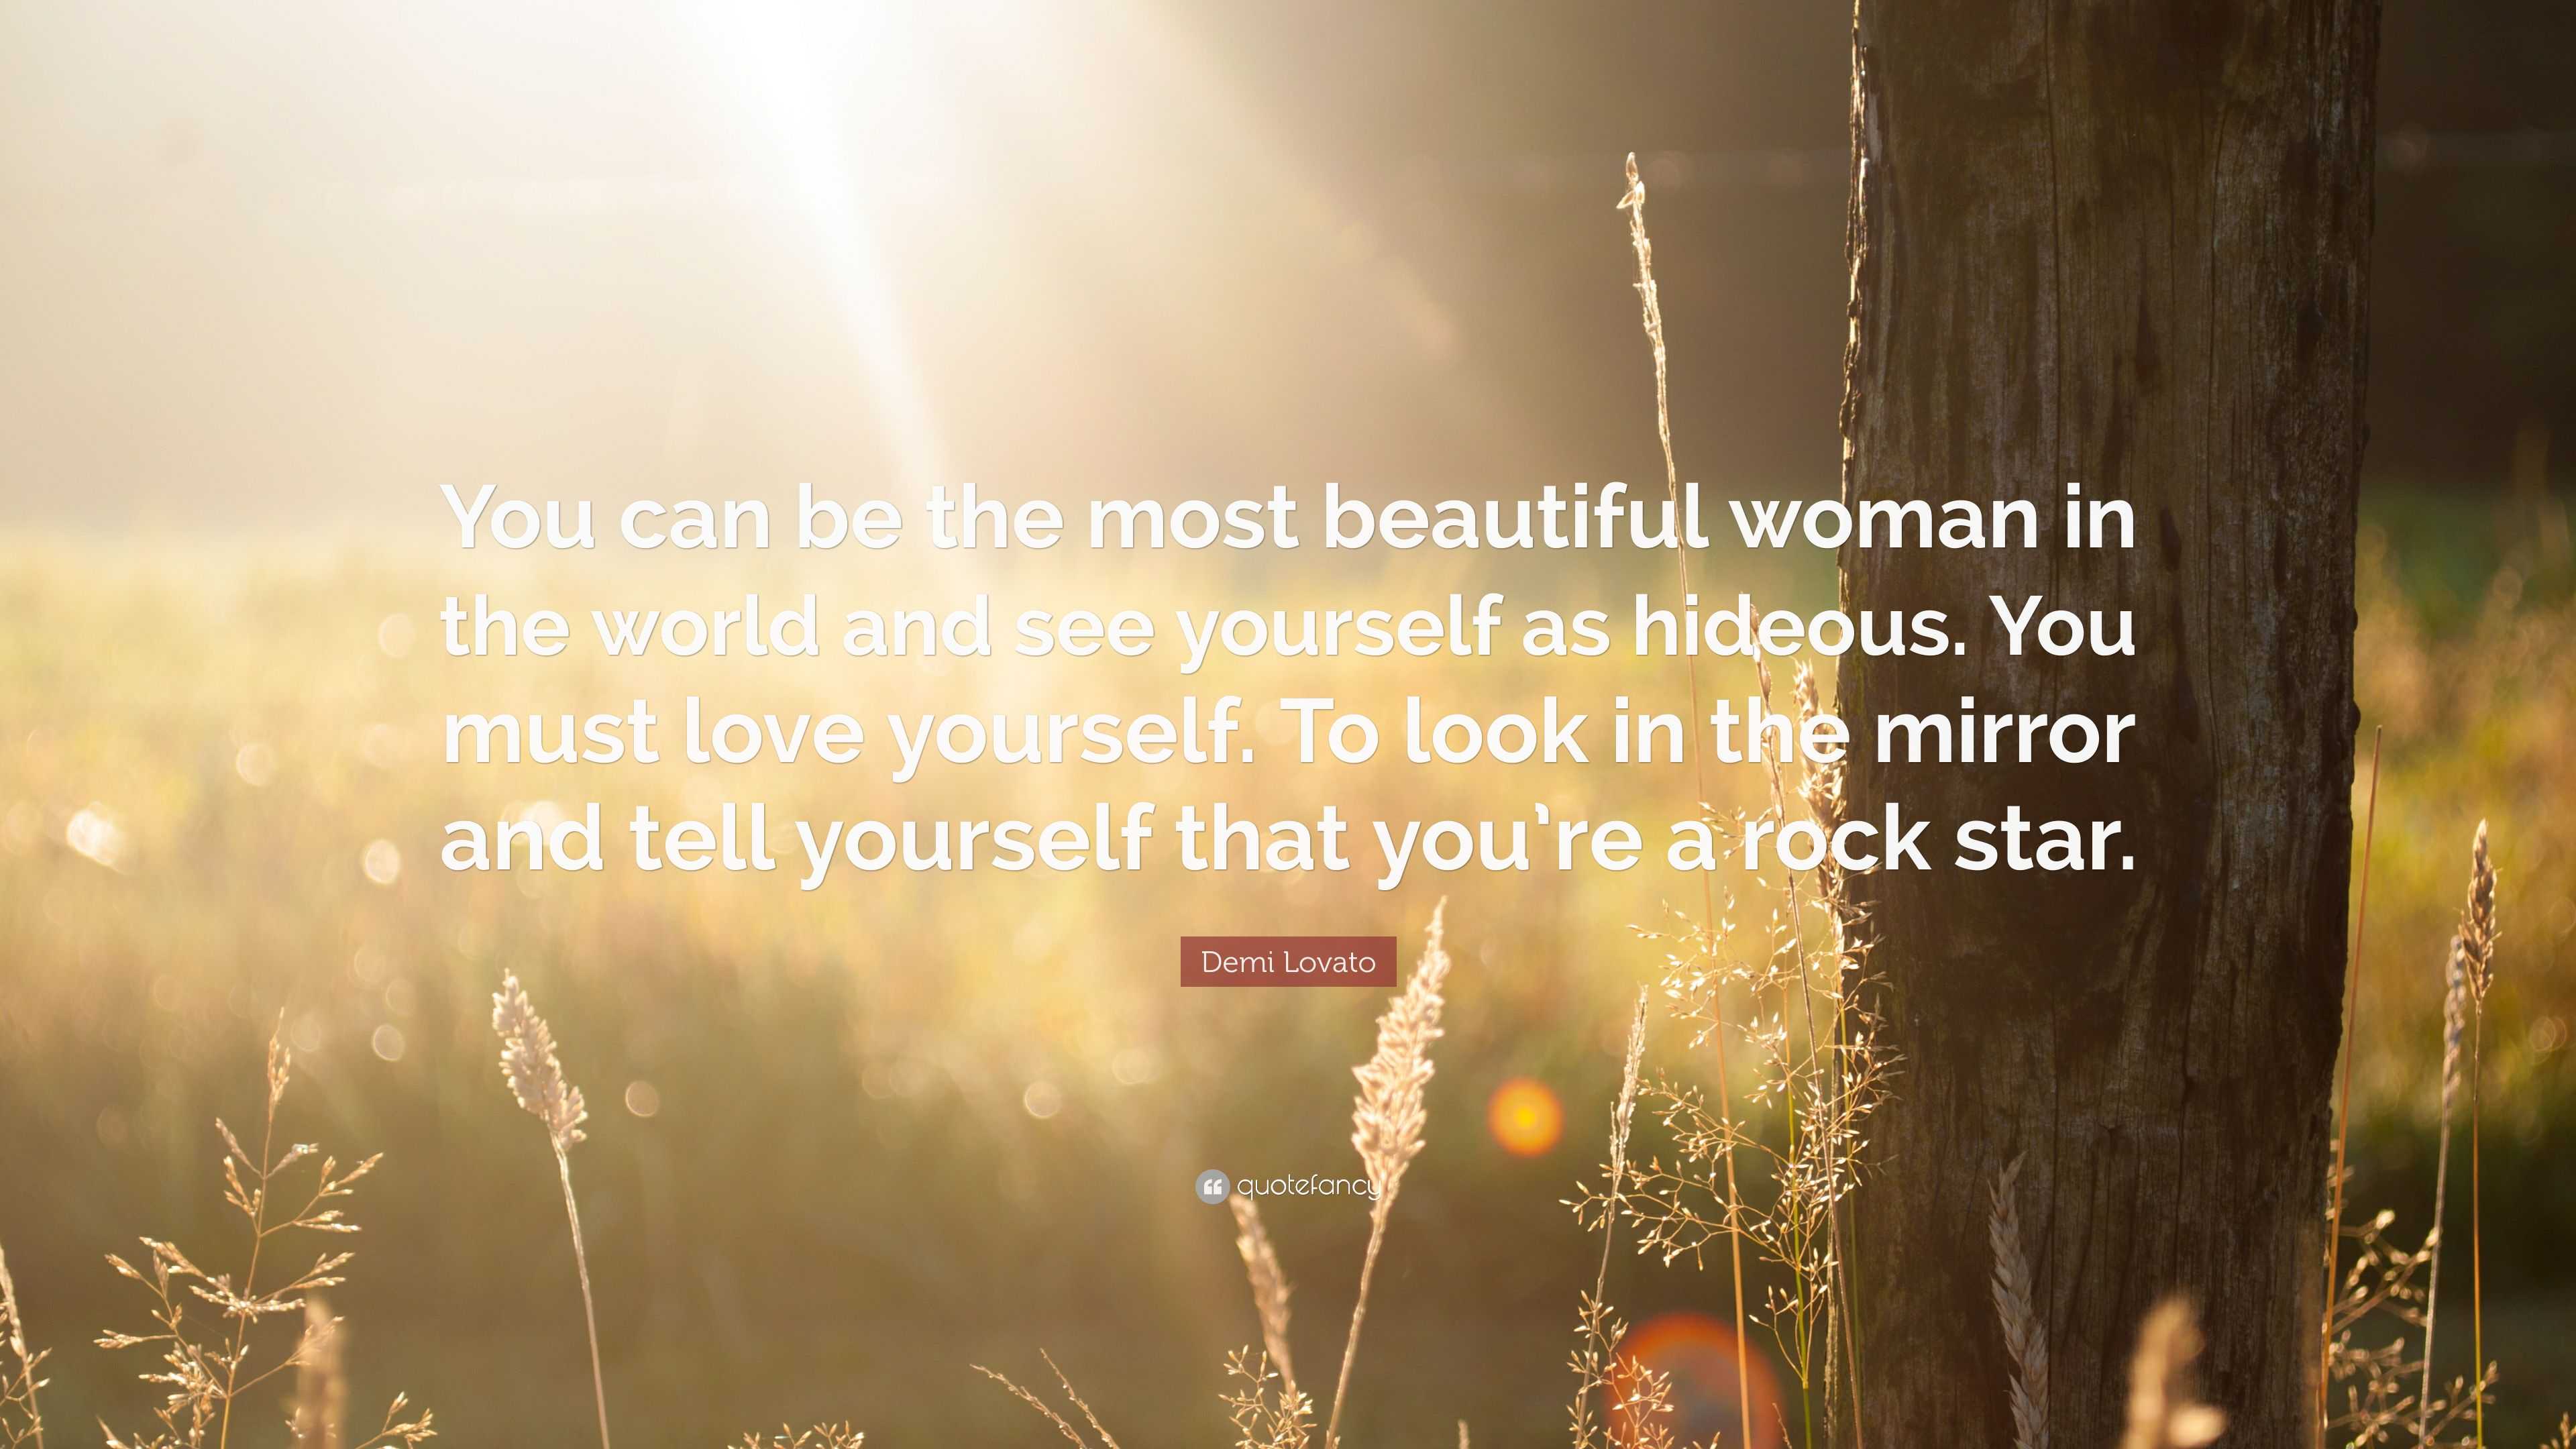 Demi Lovato Quote “You can be the most beautiful woman in